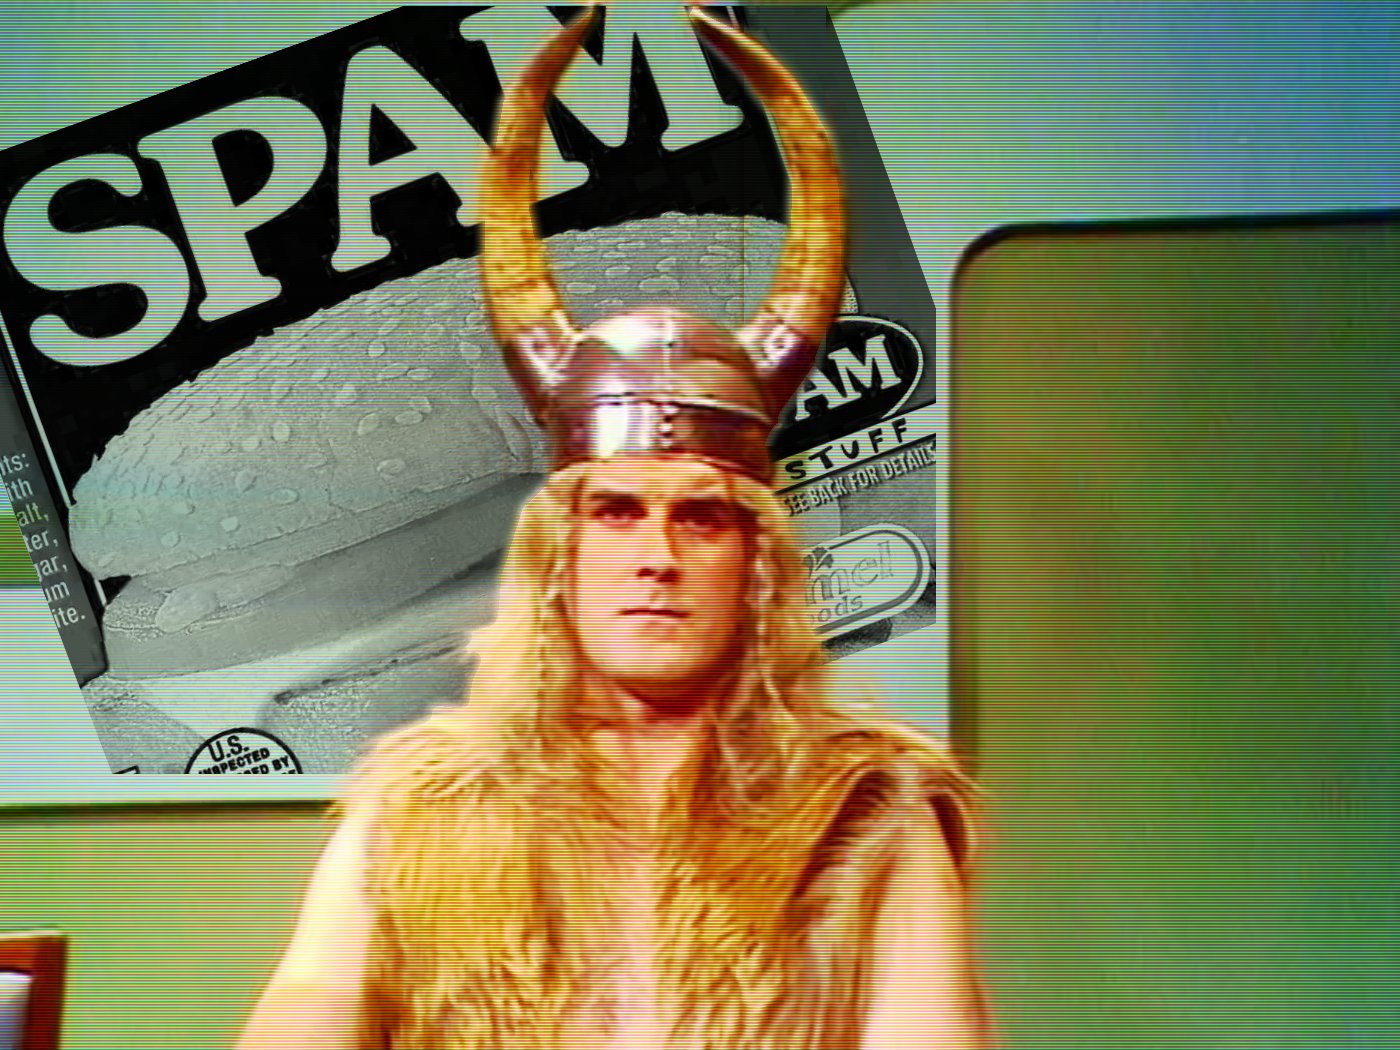 John Cleese, dressed as a viking, in front of a picture of Spam; from the sketch show Monty Python's Flying Circus